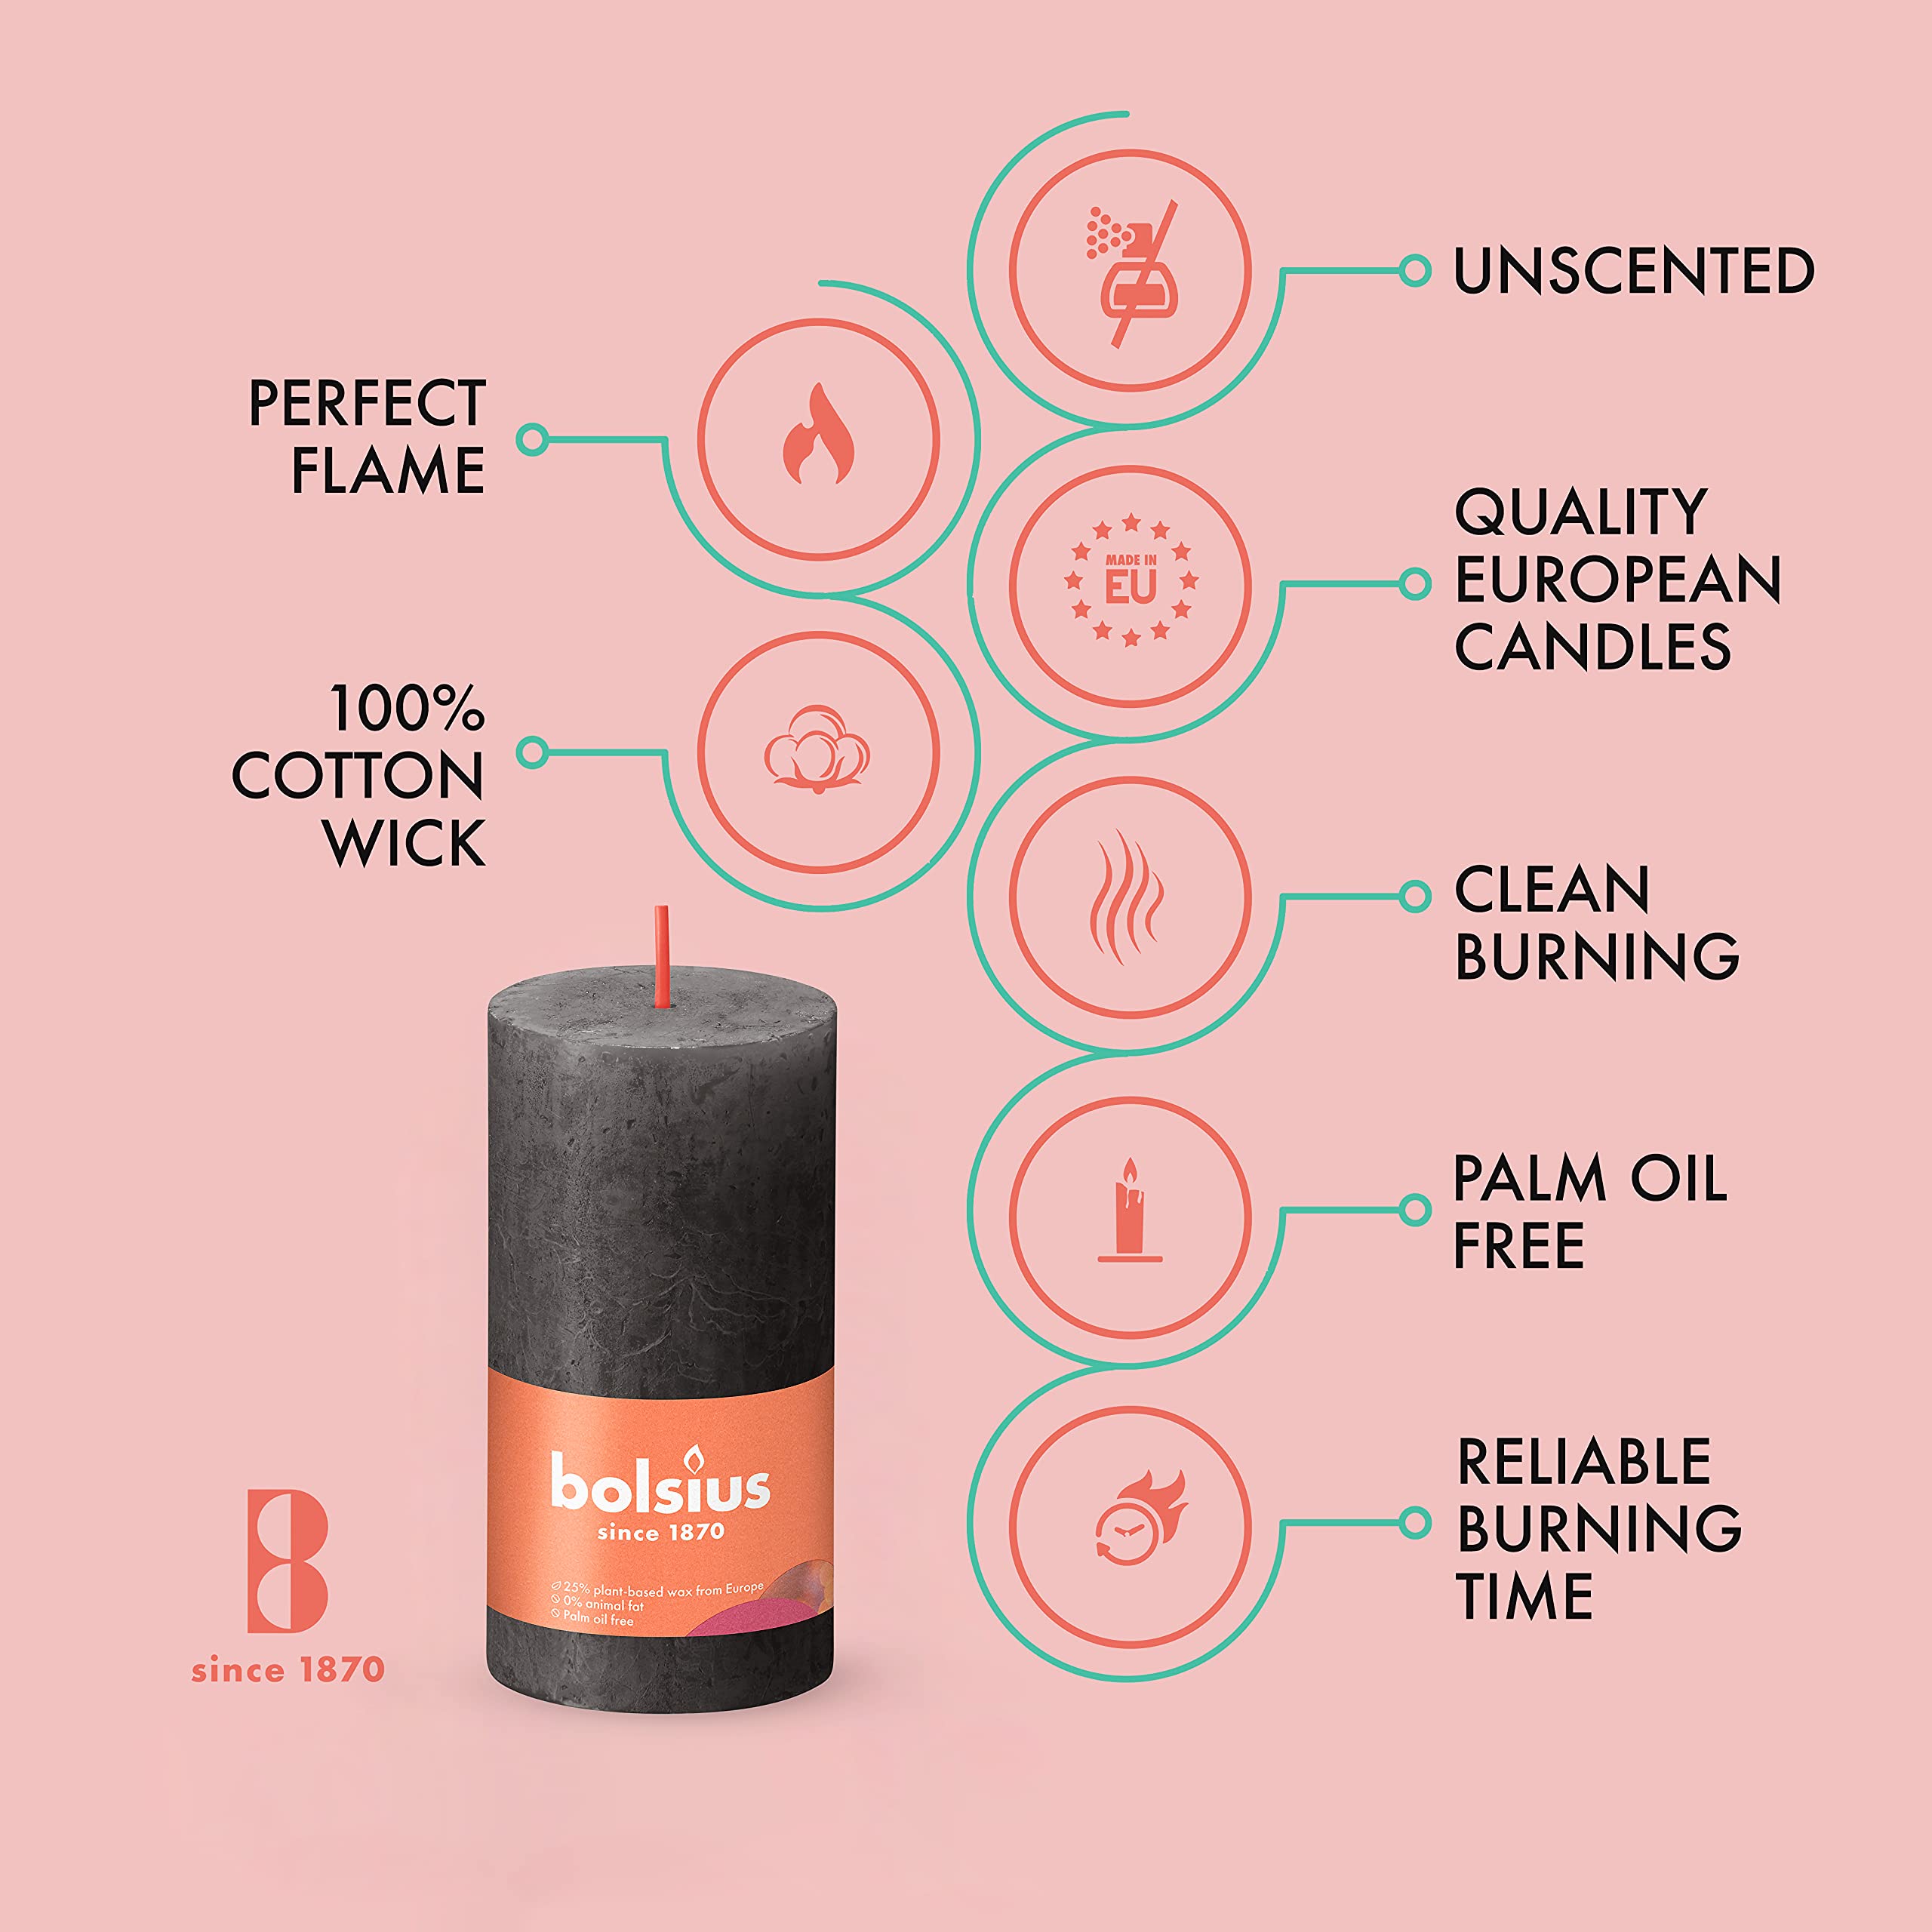 BOLSIUS 4 Pack Stormy Gray Rustic Pillar Candles - 2 X 4 Inches - Premium European Quality - Includes Natural Plant-Based Wax - Unscented Dripless Smokeless 30 Hour Party D�cor and Wedding Candles  - Acceptable